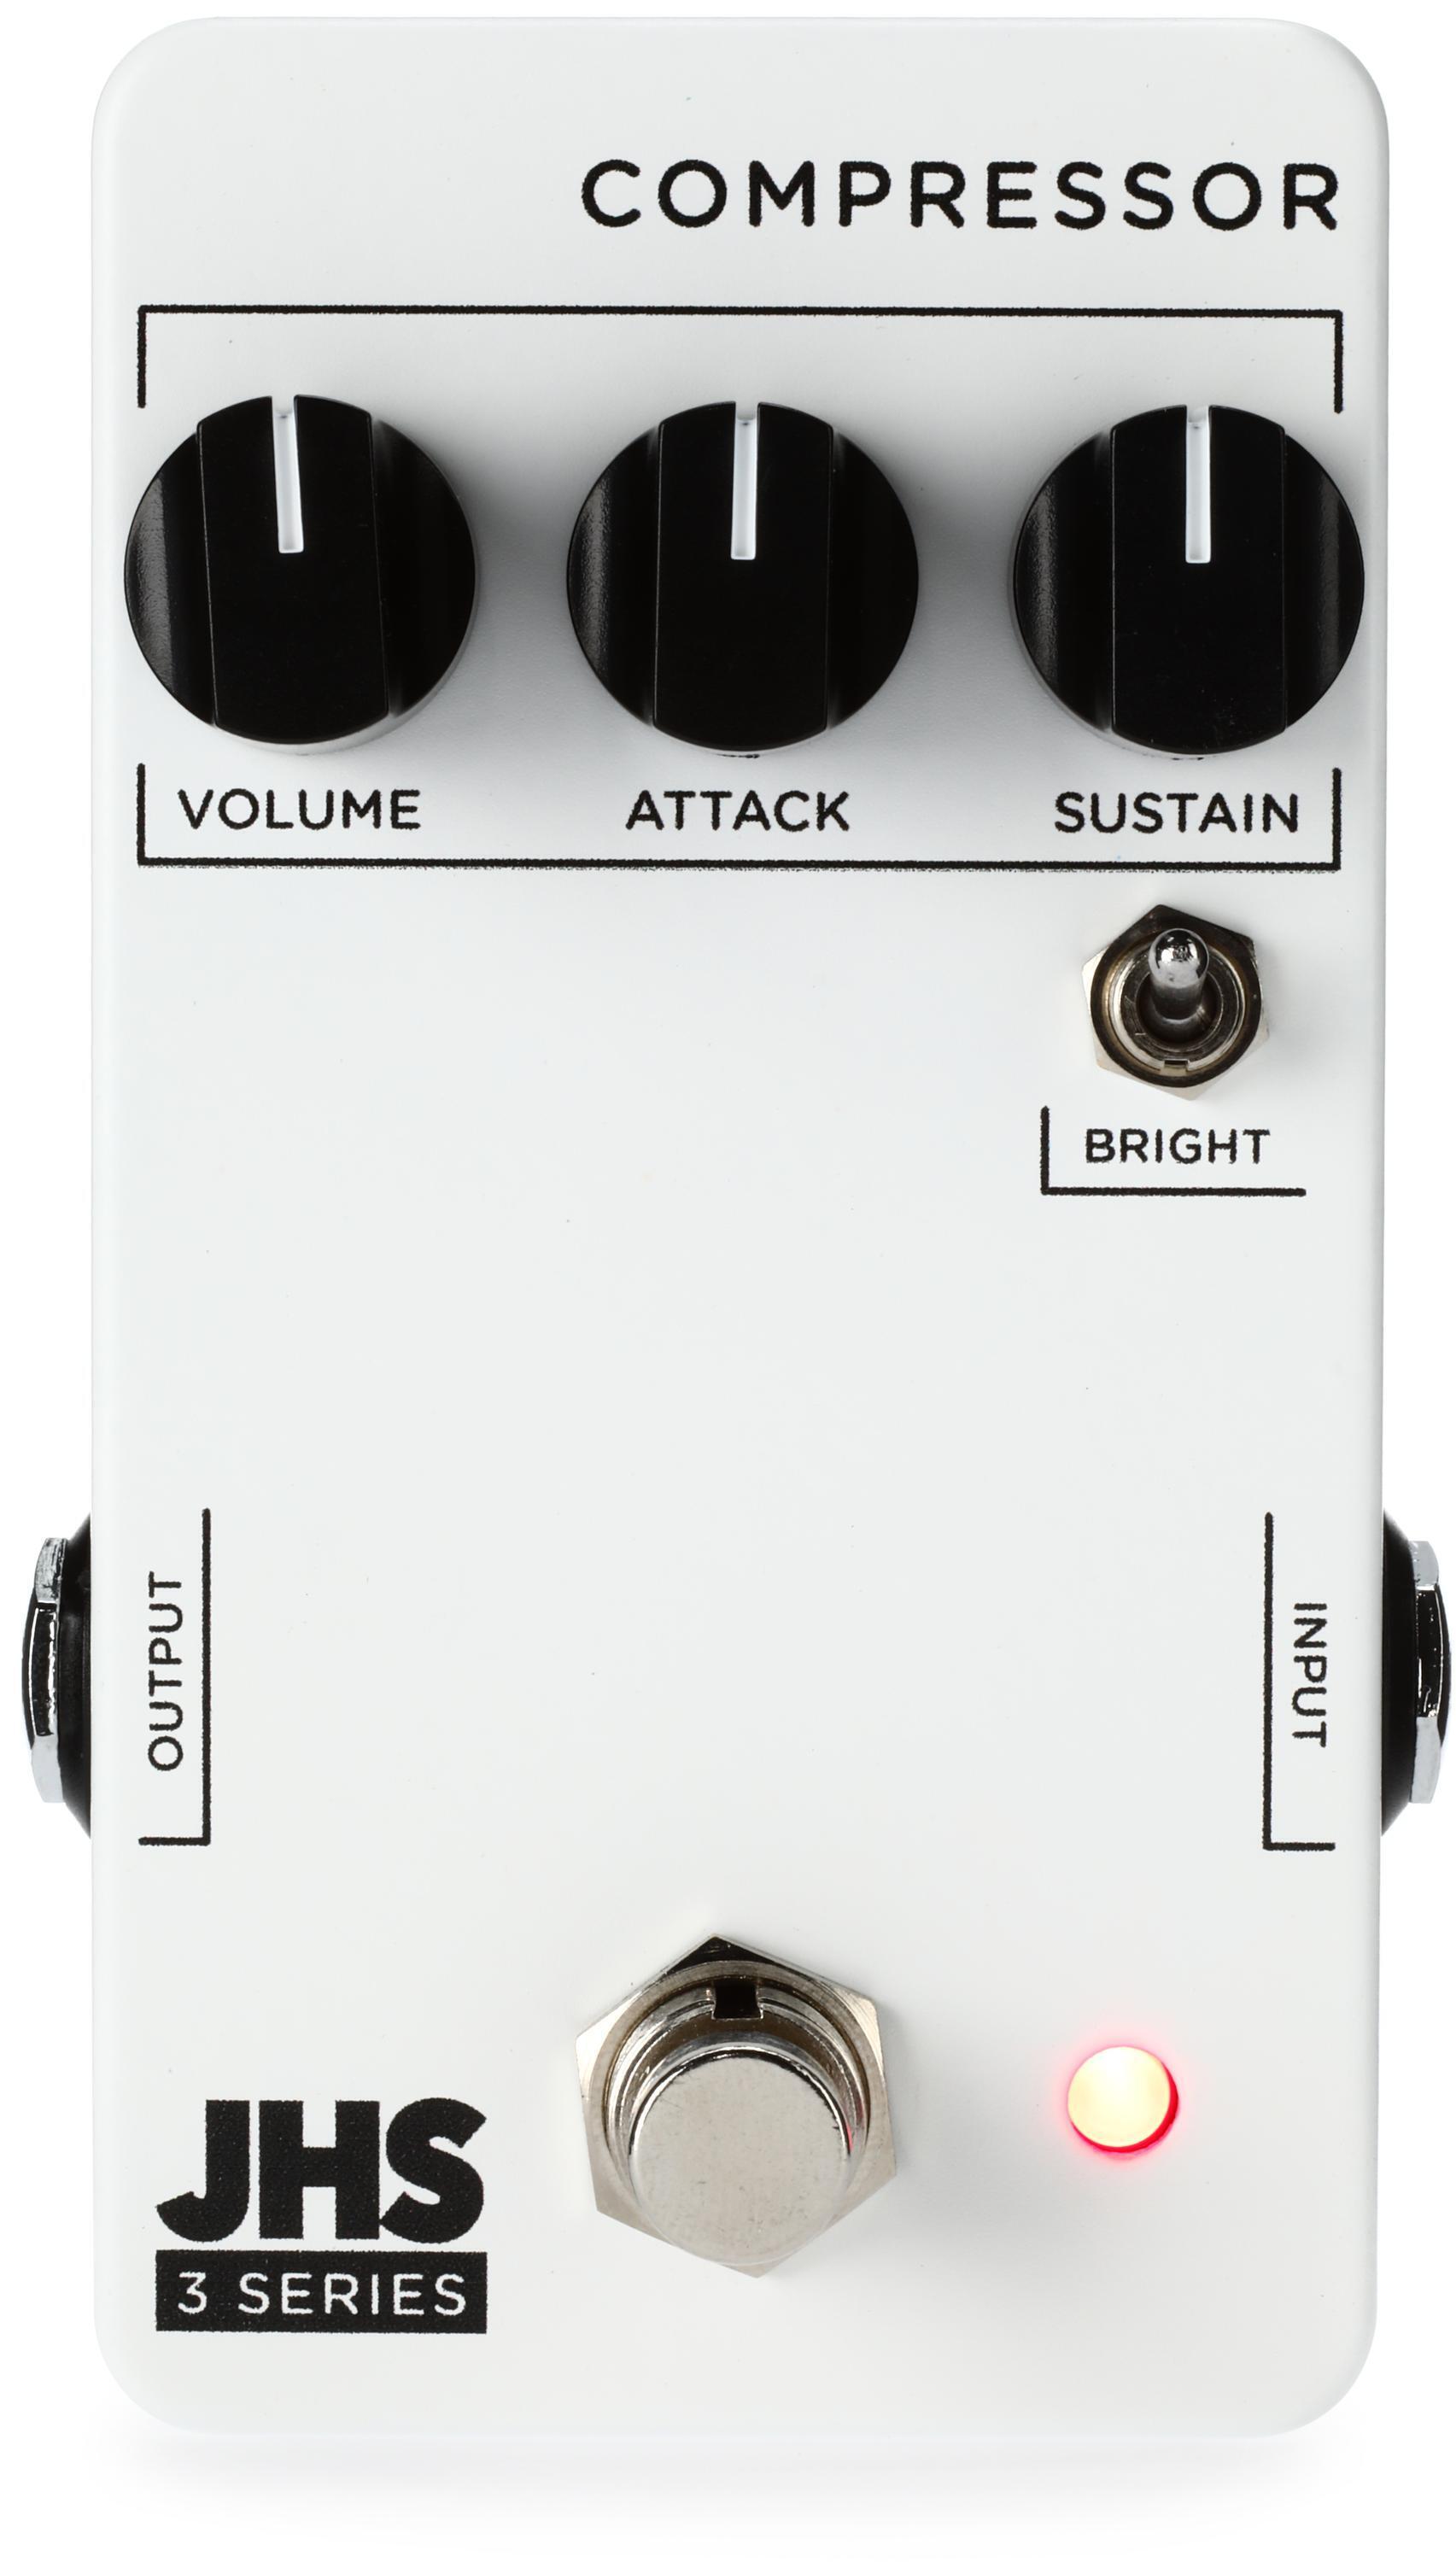 ISP Technologies DECI-MATE Micro Noise Reduction Pedal | Sweetwater